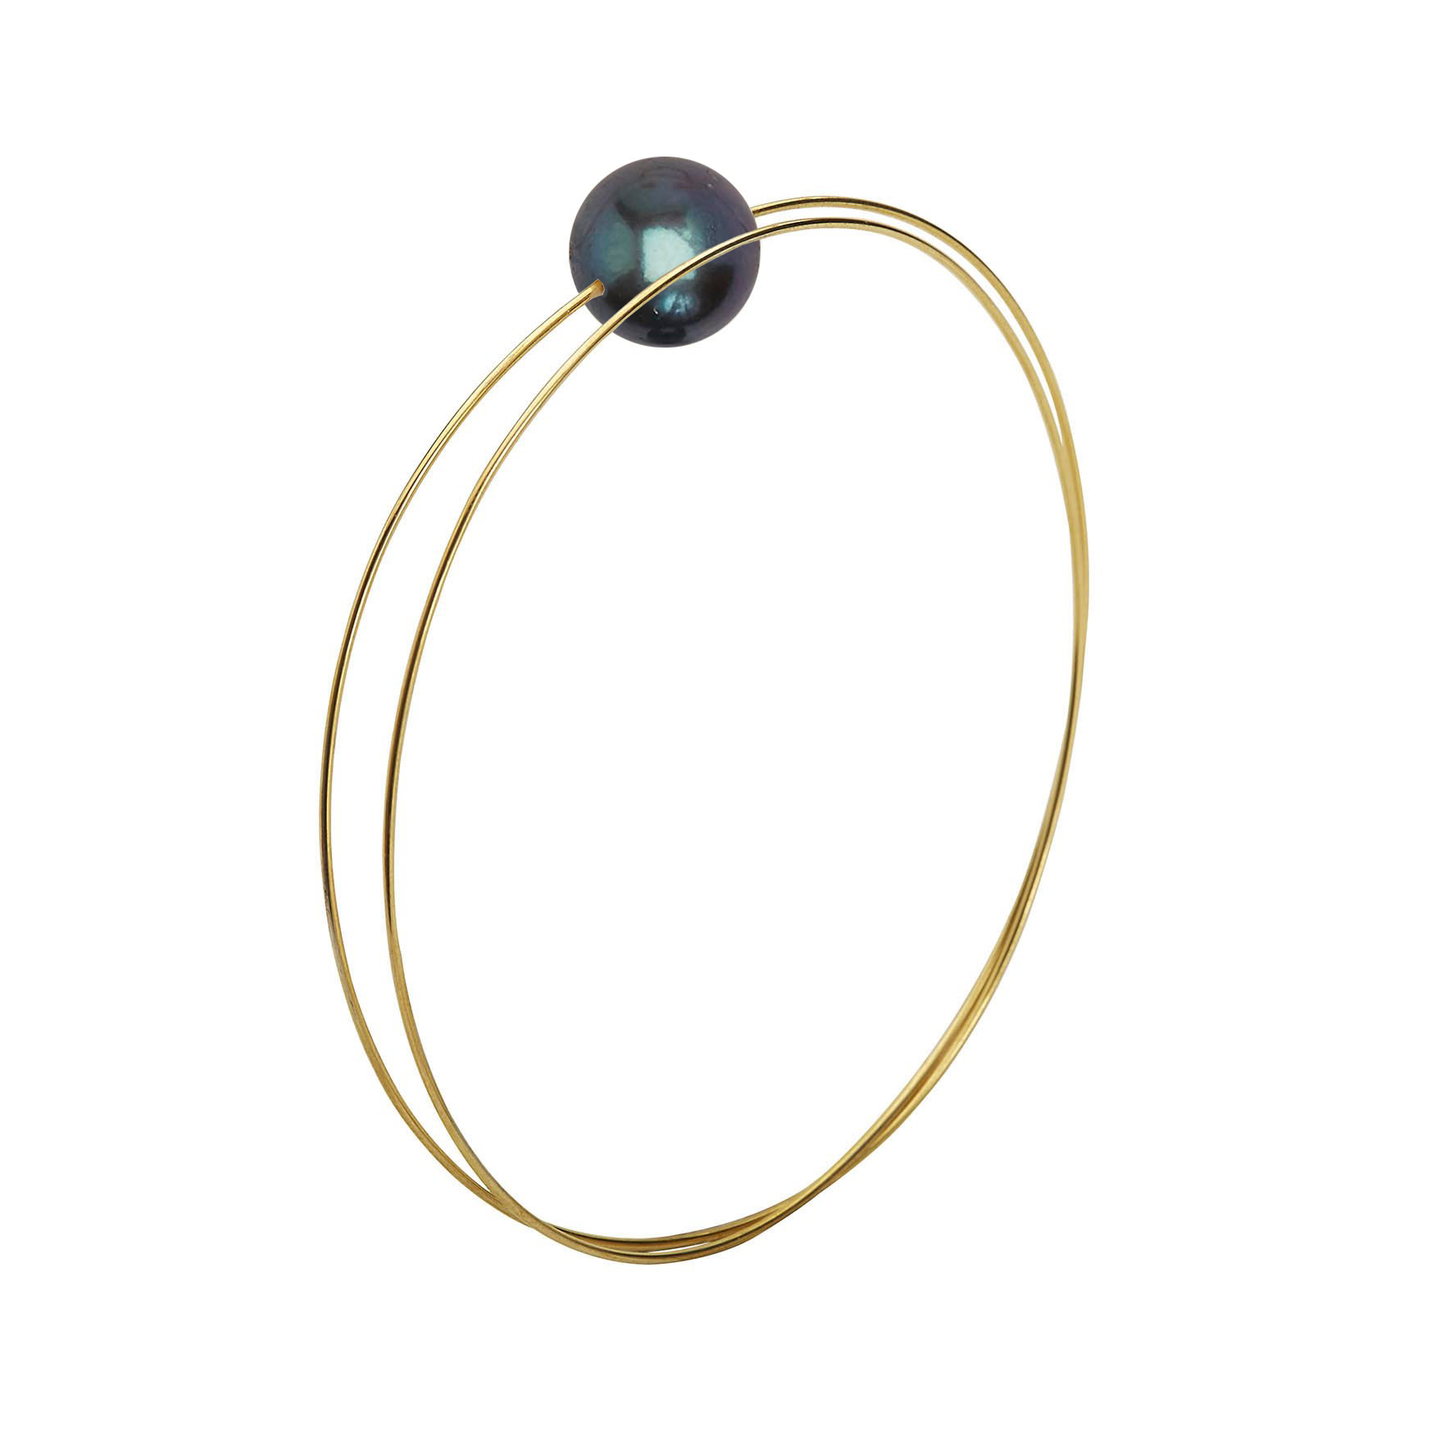 Circle Wrap Bangle with 12mm Round Freshwater Pearl